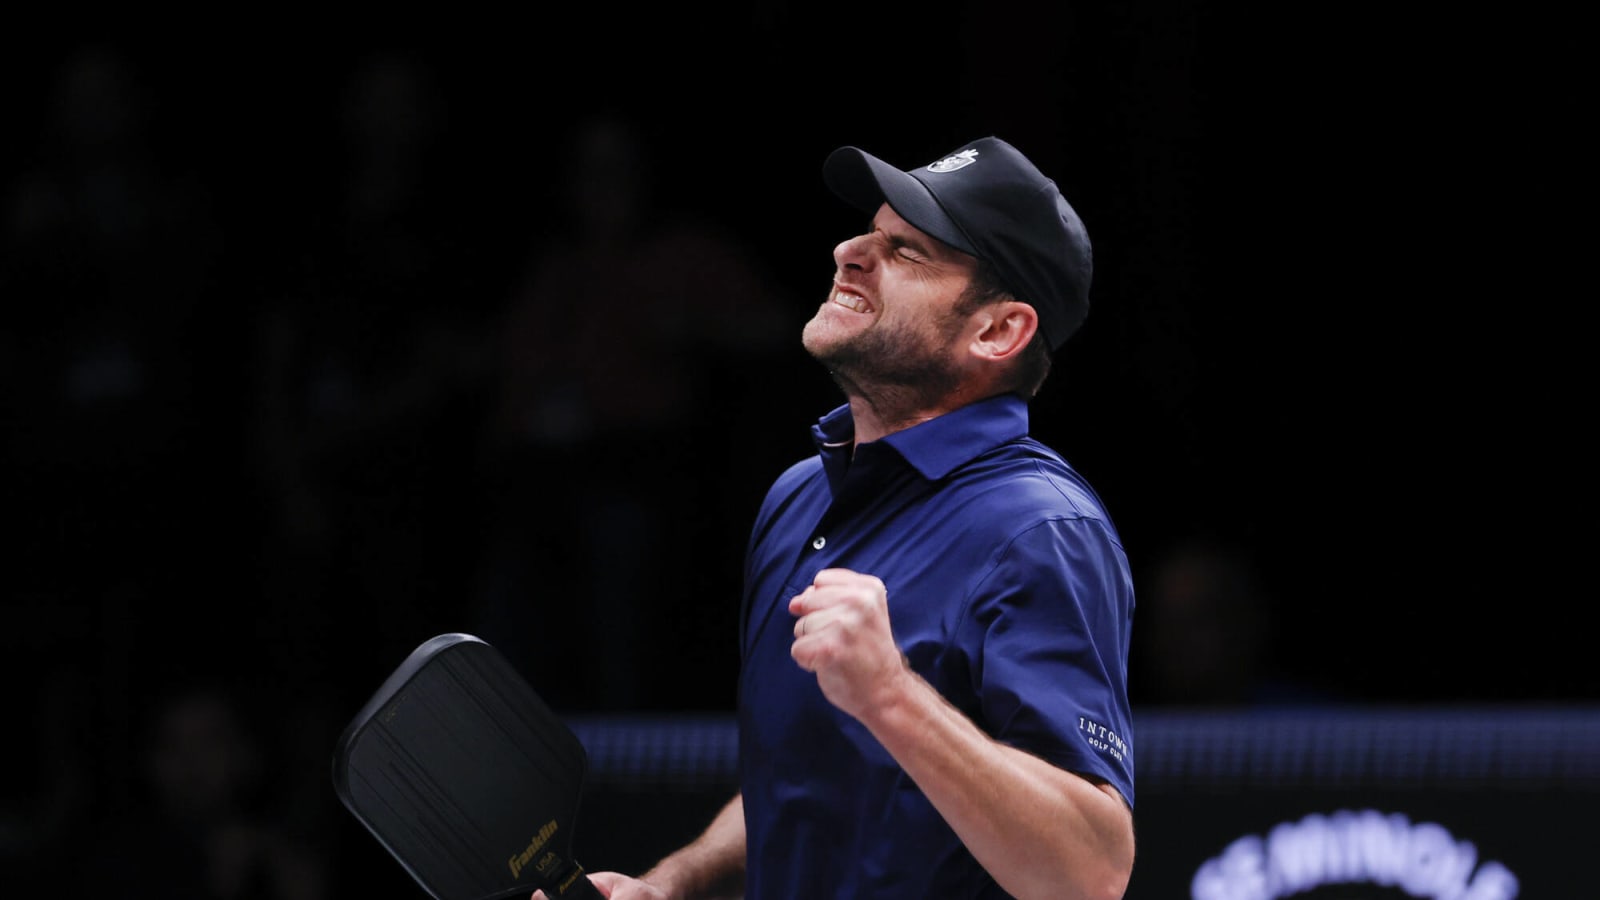 'I just want to get kicked out…' Andy Roddick expresses visible annoyance at pickleball player’s open challenge to him over social media